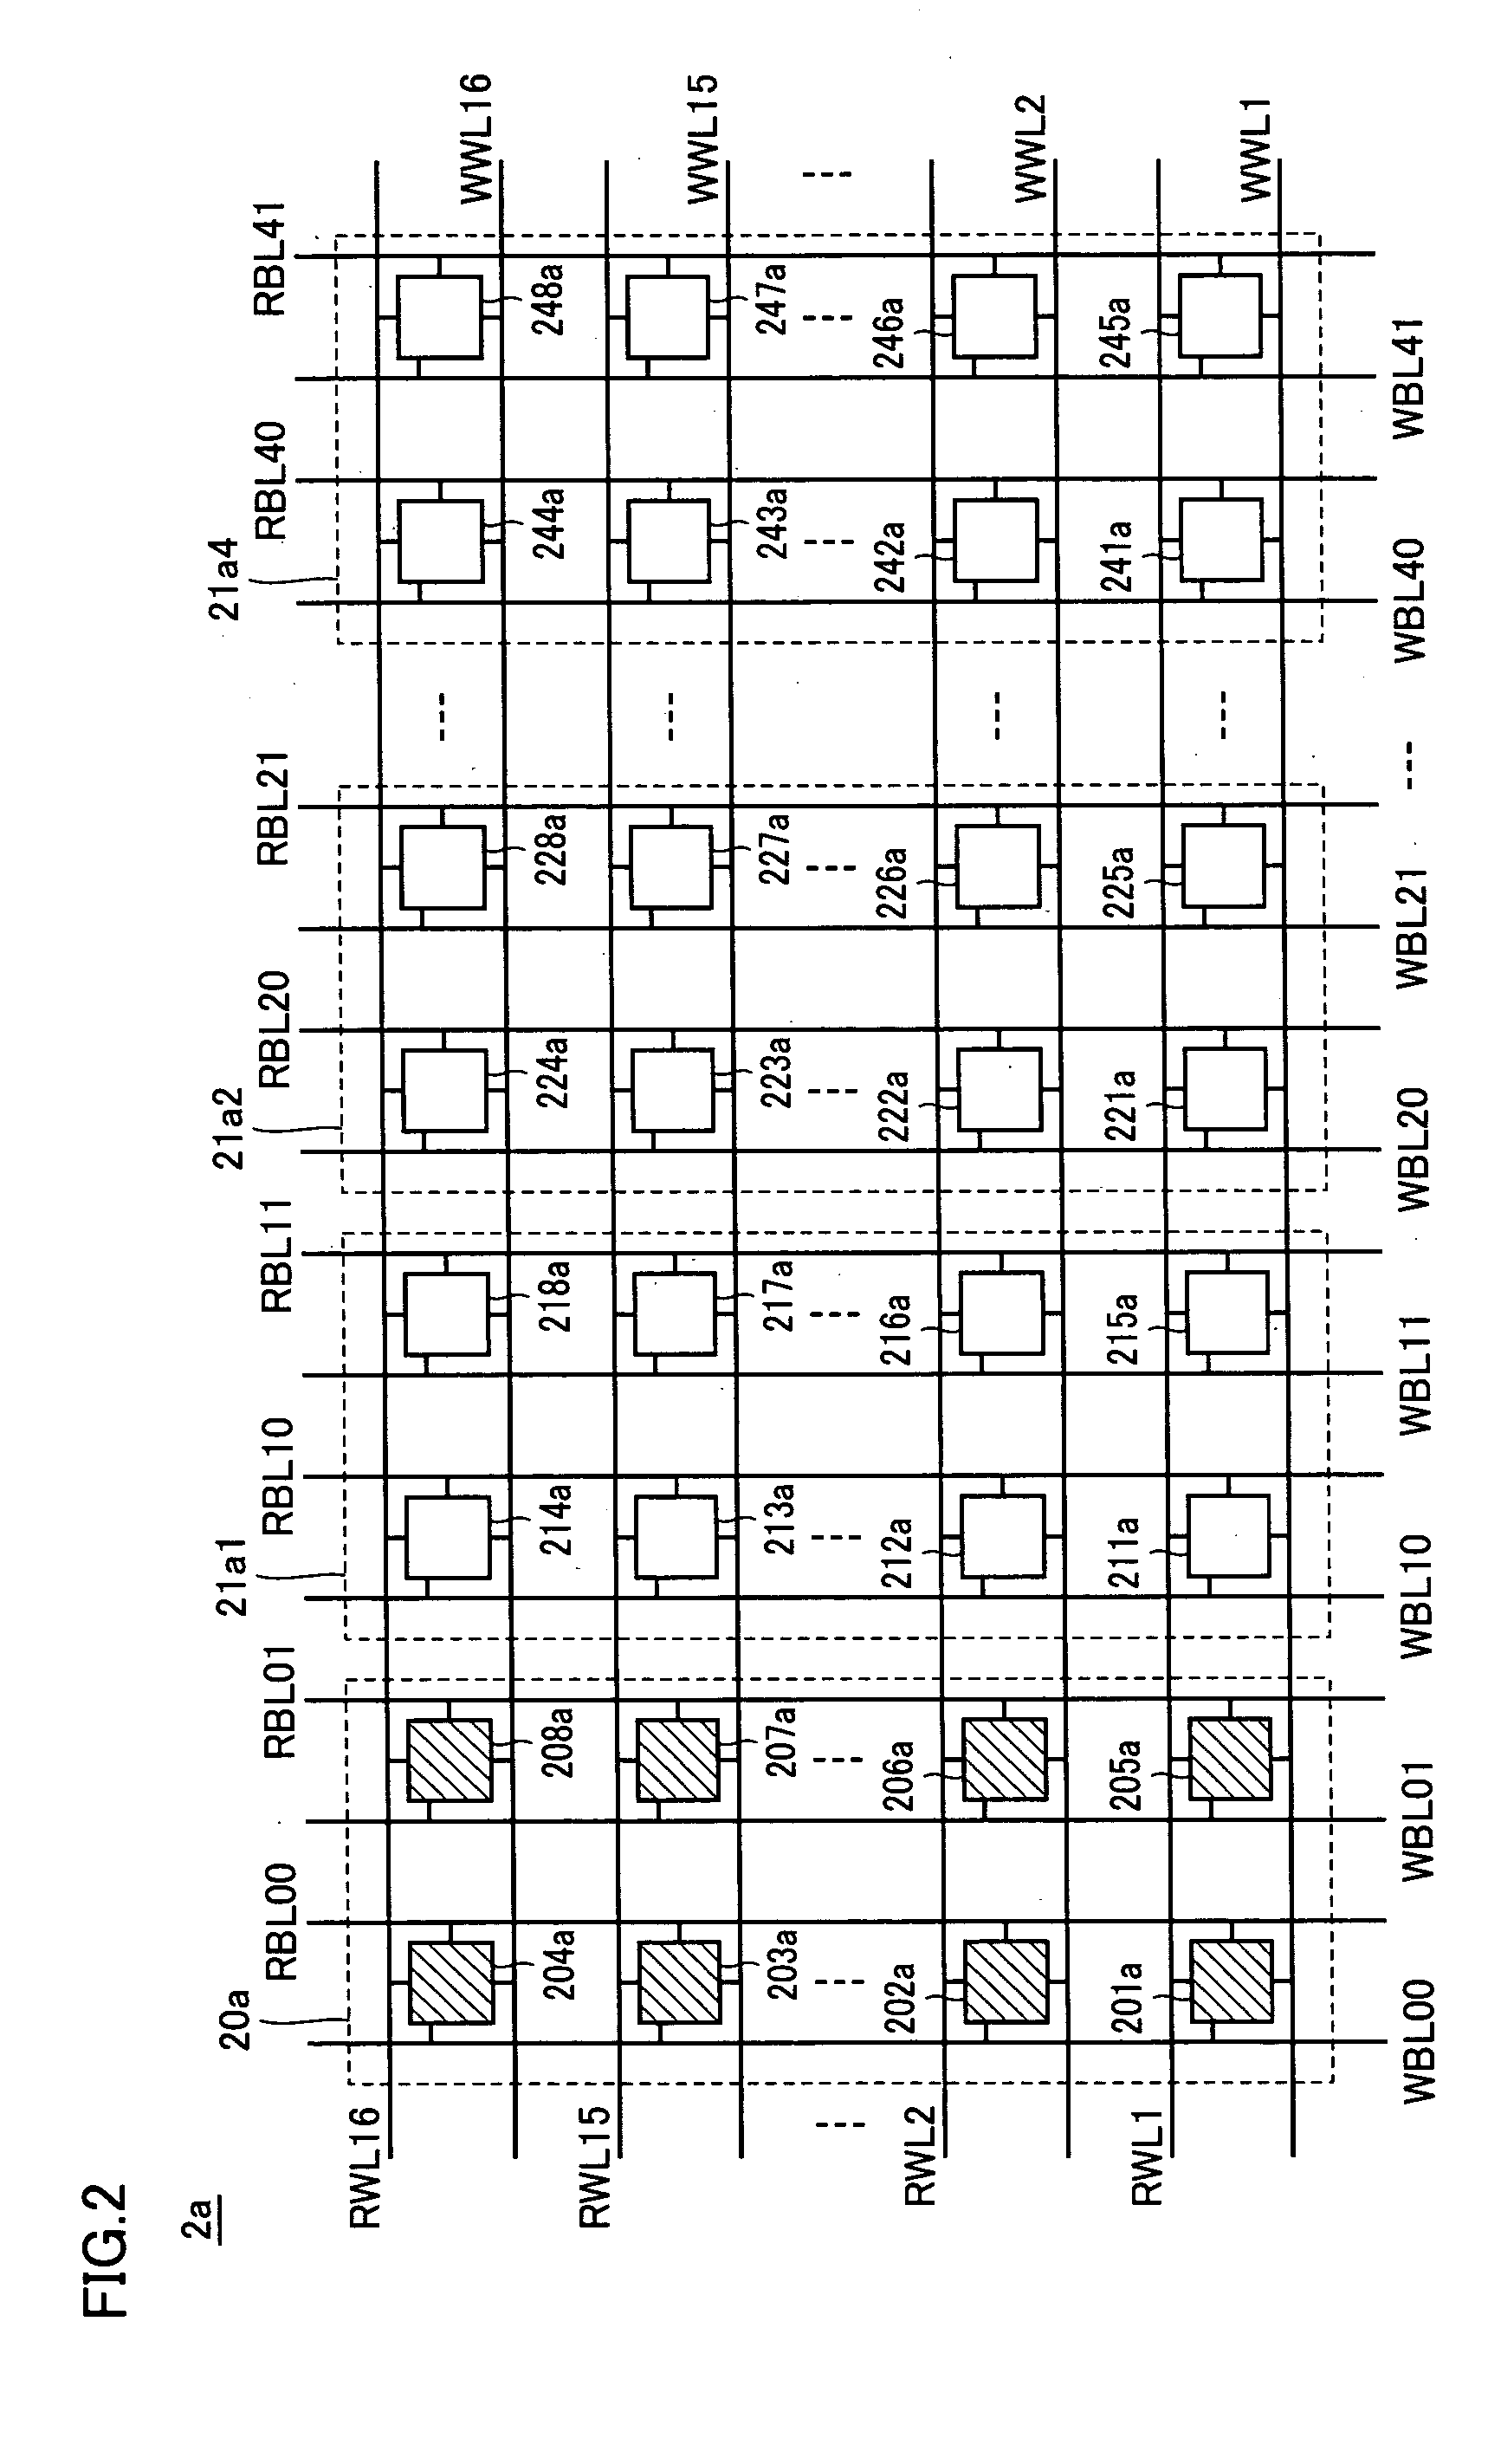 Semiconductor memory device capable of reducing power consumption during reading and standby